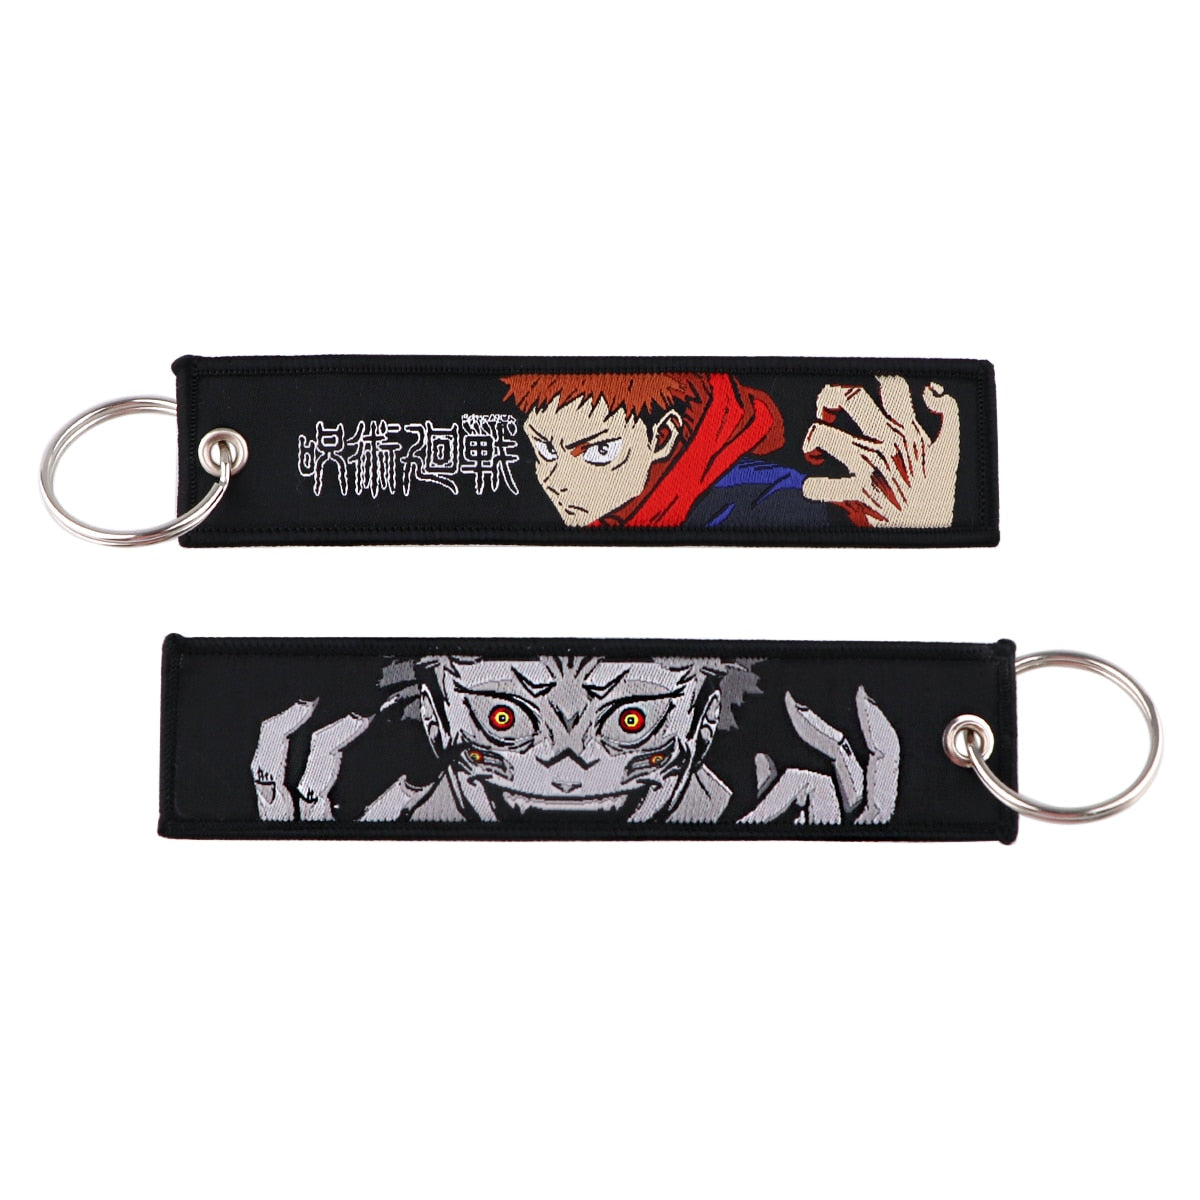 Anime Embroidery Keychain Key Ring 13